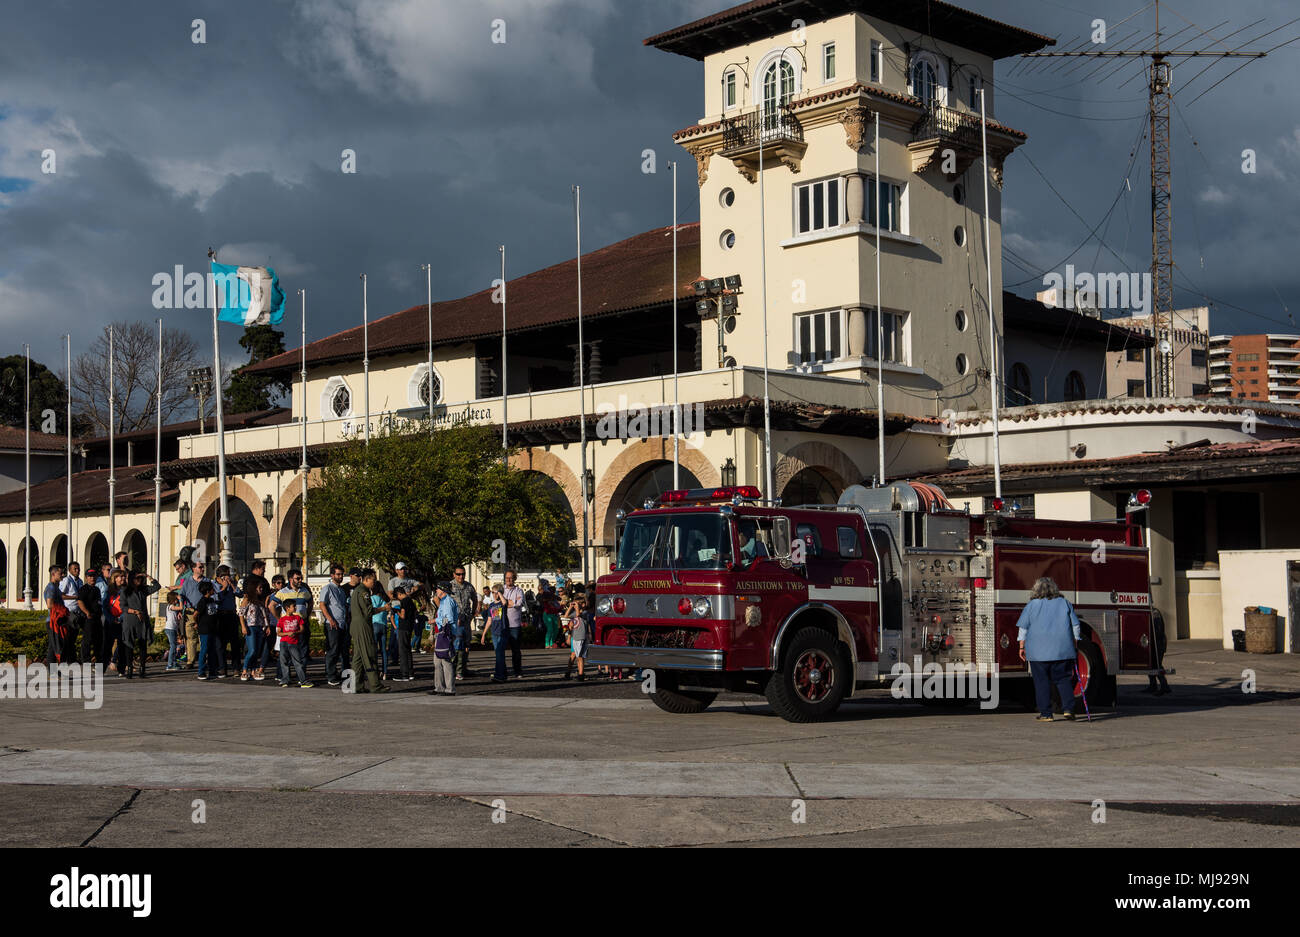 Airmen from the 21st Airlift Squadron, deliver a firetruck at La Aurora International Airport, Guatemala City, Guatemala, April 20, 2018 during a Denton Program mission. The Denton Program is a Department of Defense transportation program that moves humanitarian cargo, donated by U.S. based Non-Governmental Organizations to developing nations to ease human suffering. The emergency vehicles were donated by the Mission of Love Foundation, they are the largest user of the Denton Program, having delivered medical, relief and humanitarian supplies to needy communities throughout the world. (U.S. Ai Stock Photo